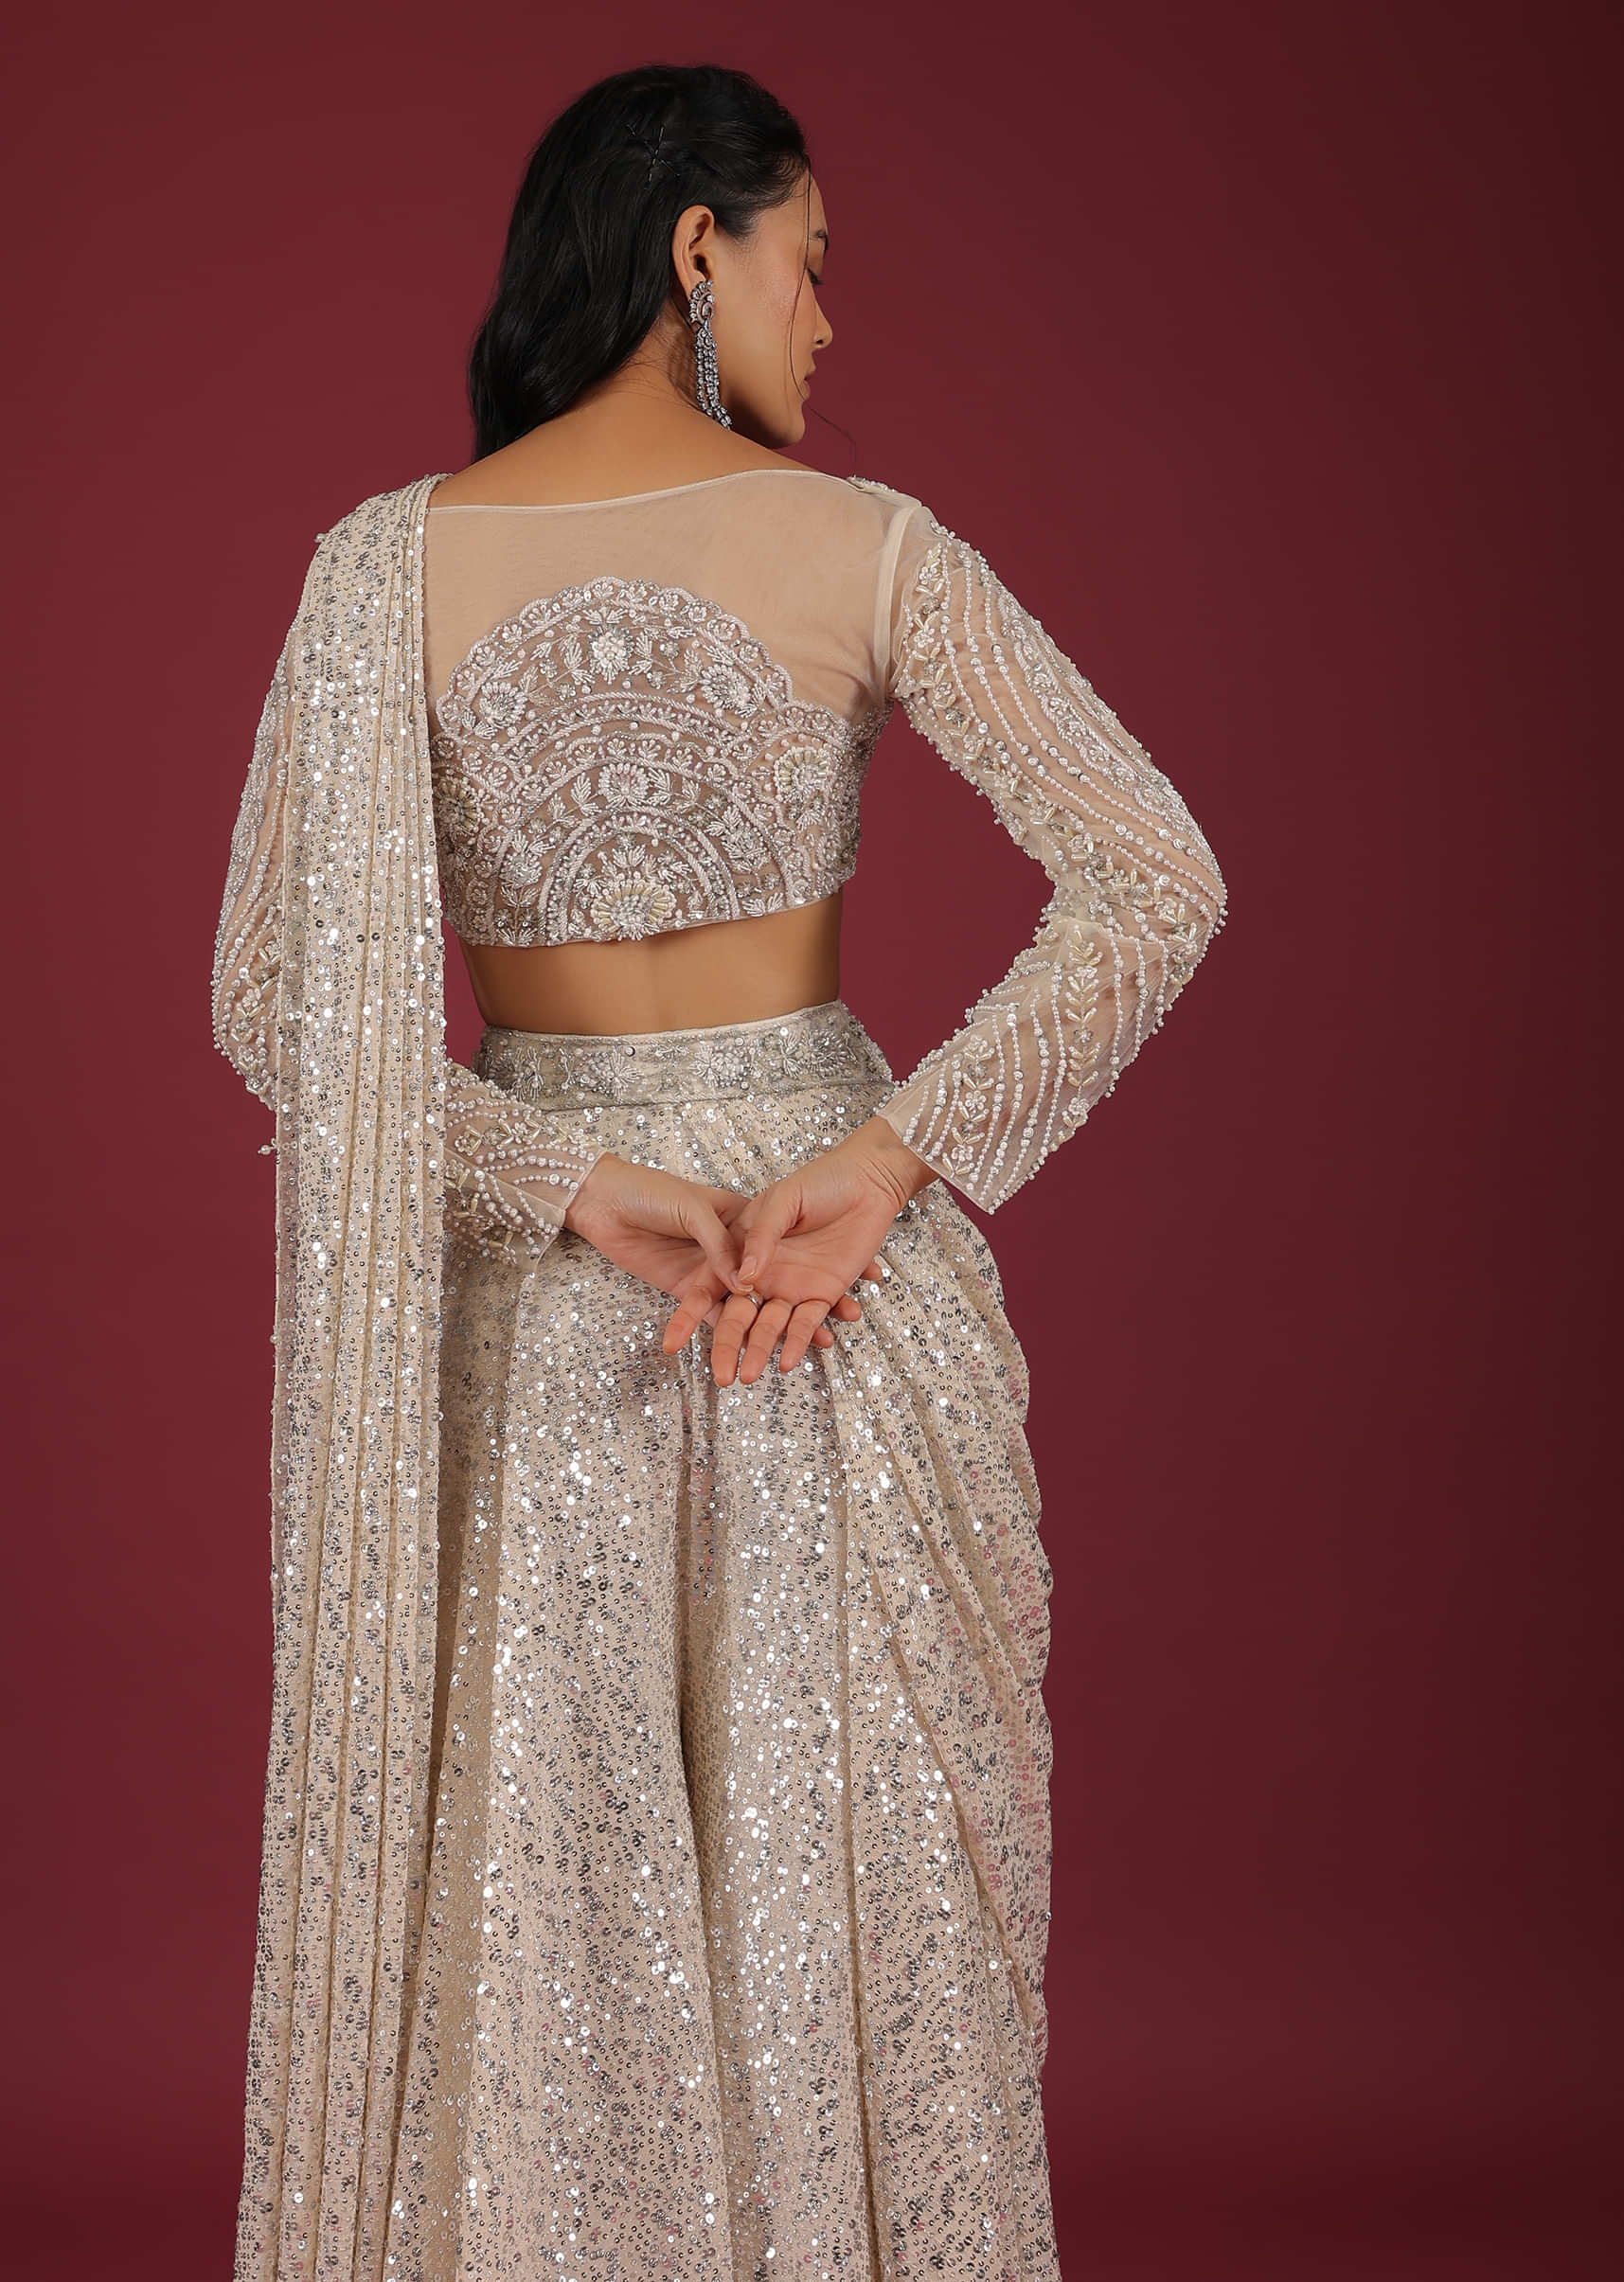 Sandshell Cream Palazzo Saree In Sequins Embroidery